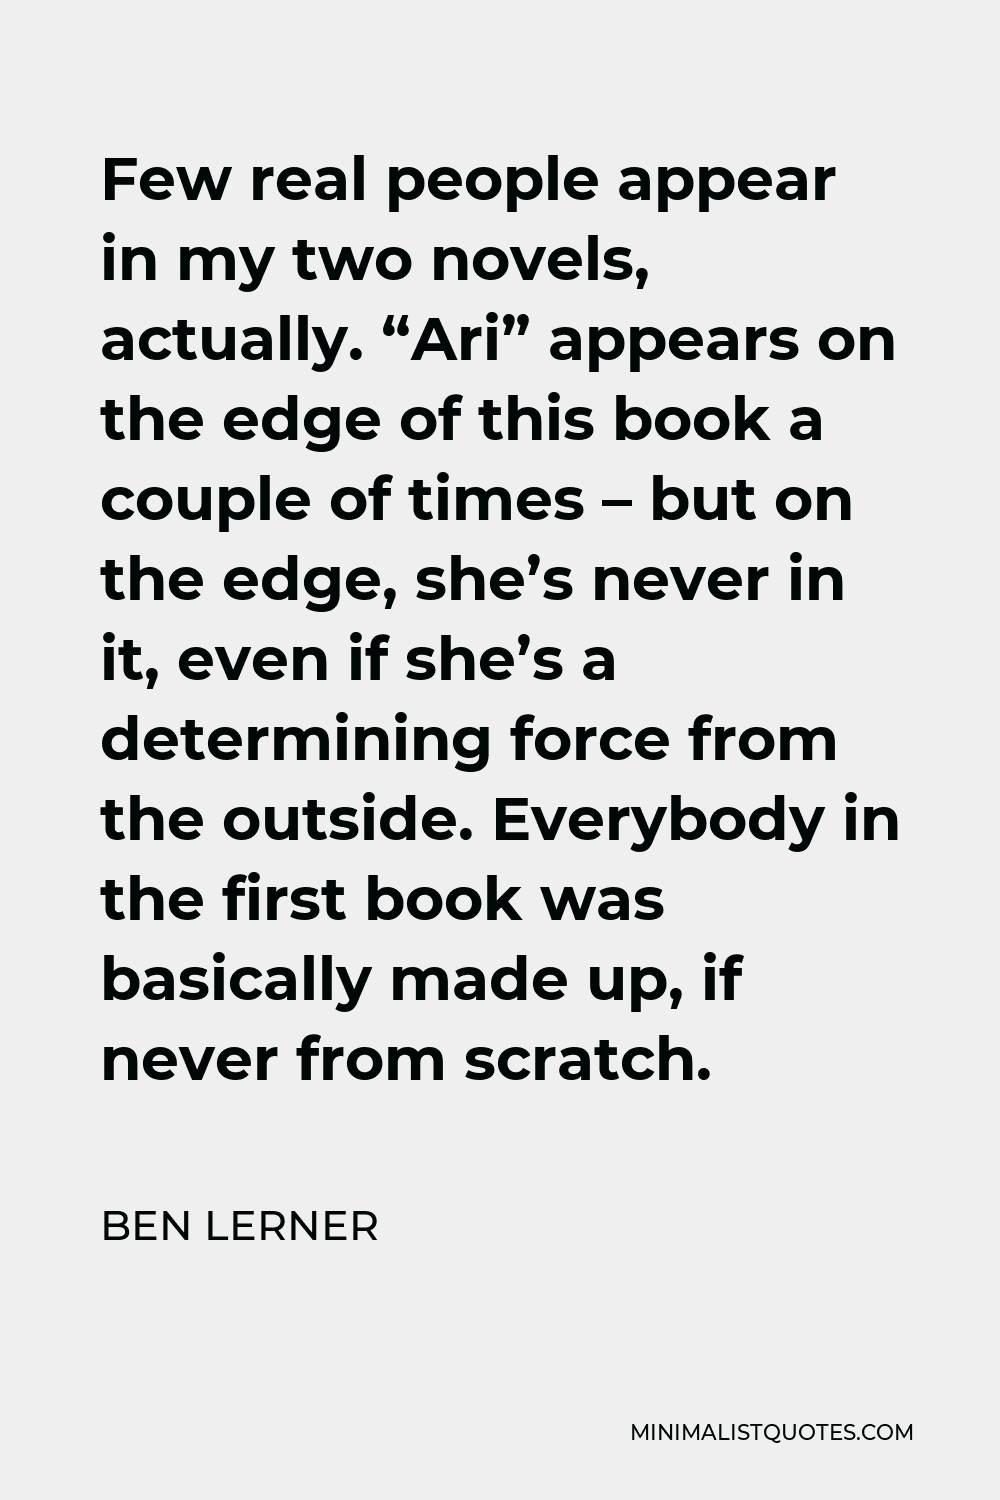 Ben Lerner Quote - Few real people appear in my two novels, actually. “Ari” appears on the edge of this book a couple of times – but on the edge, she’s never in it, even if she’s a determining force from the outside. Everybody in the first book was basically made up, if never from scratch.